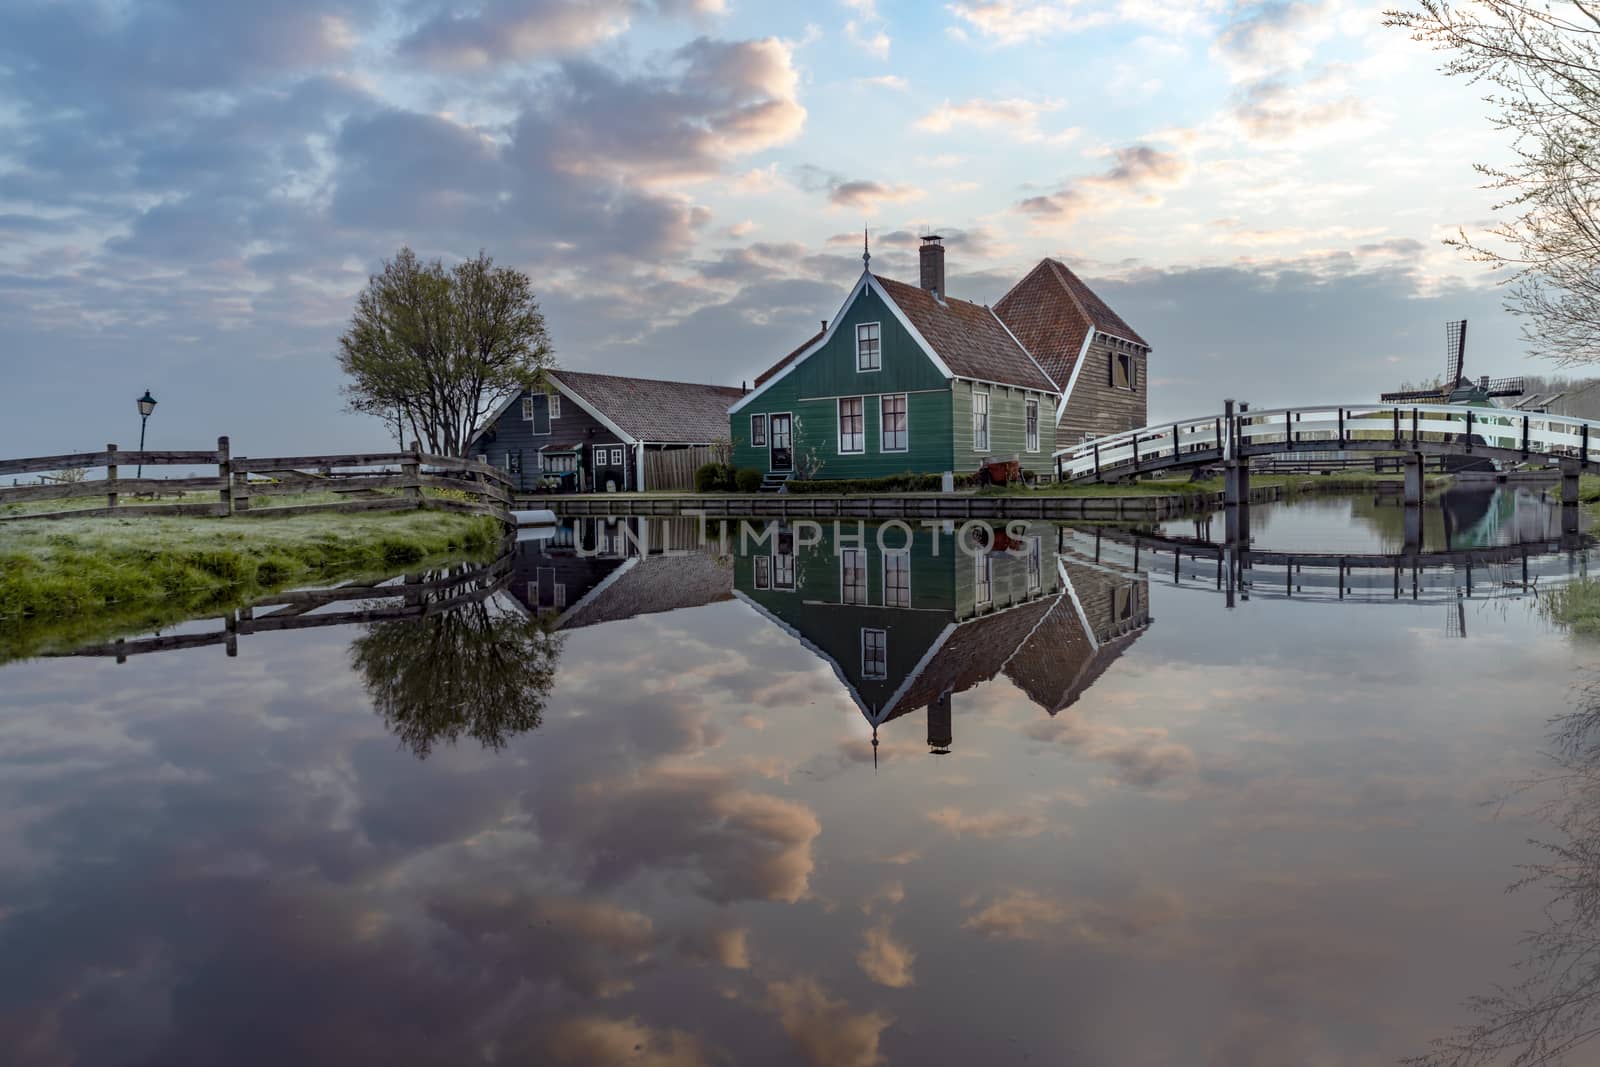 Long exposure of a reflection of the wooden green houses topped with dark orange color roof reflected on the calm water of the canal by ankorlight